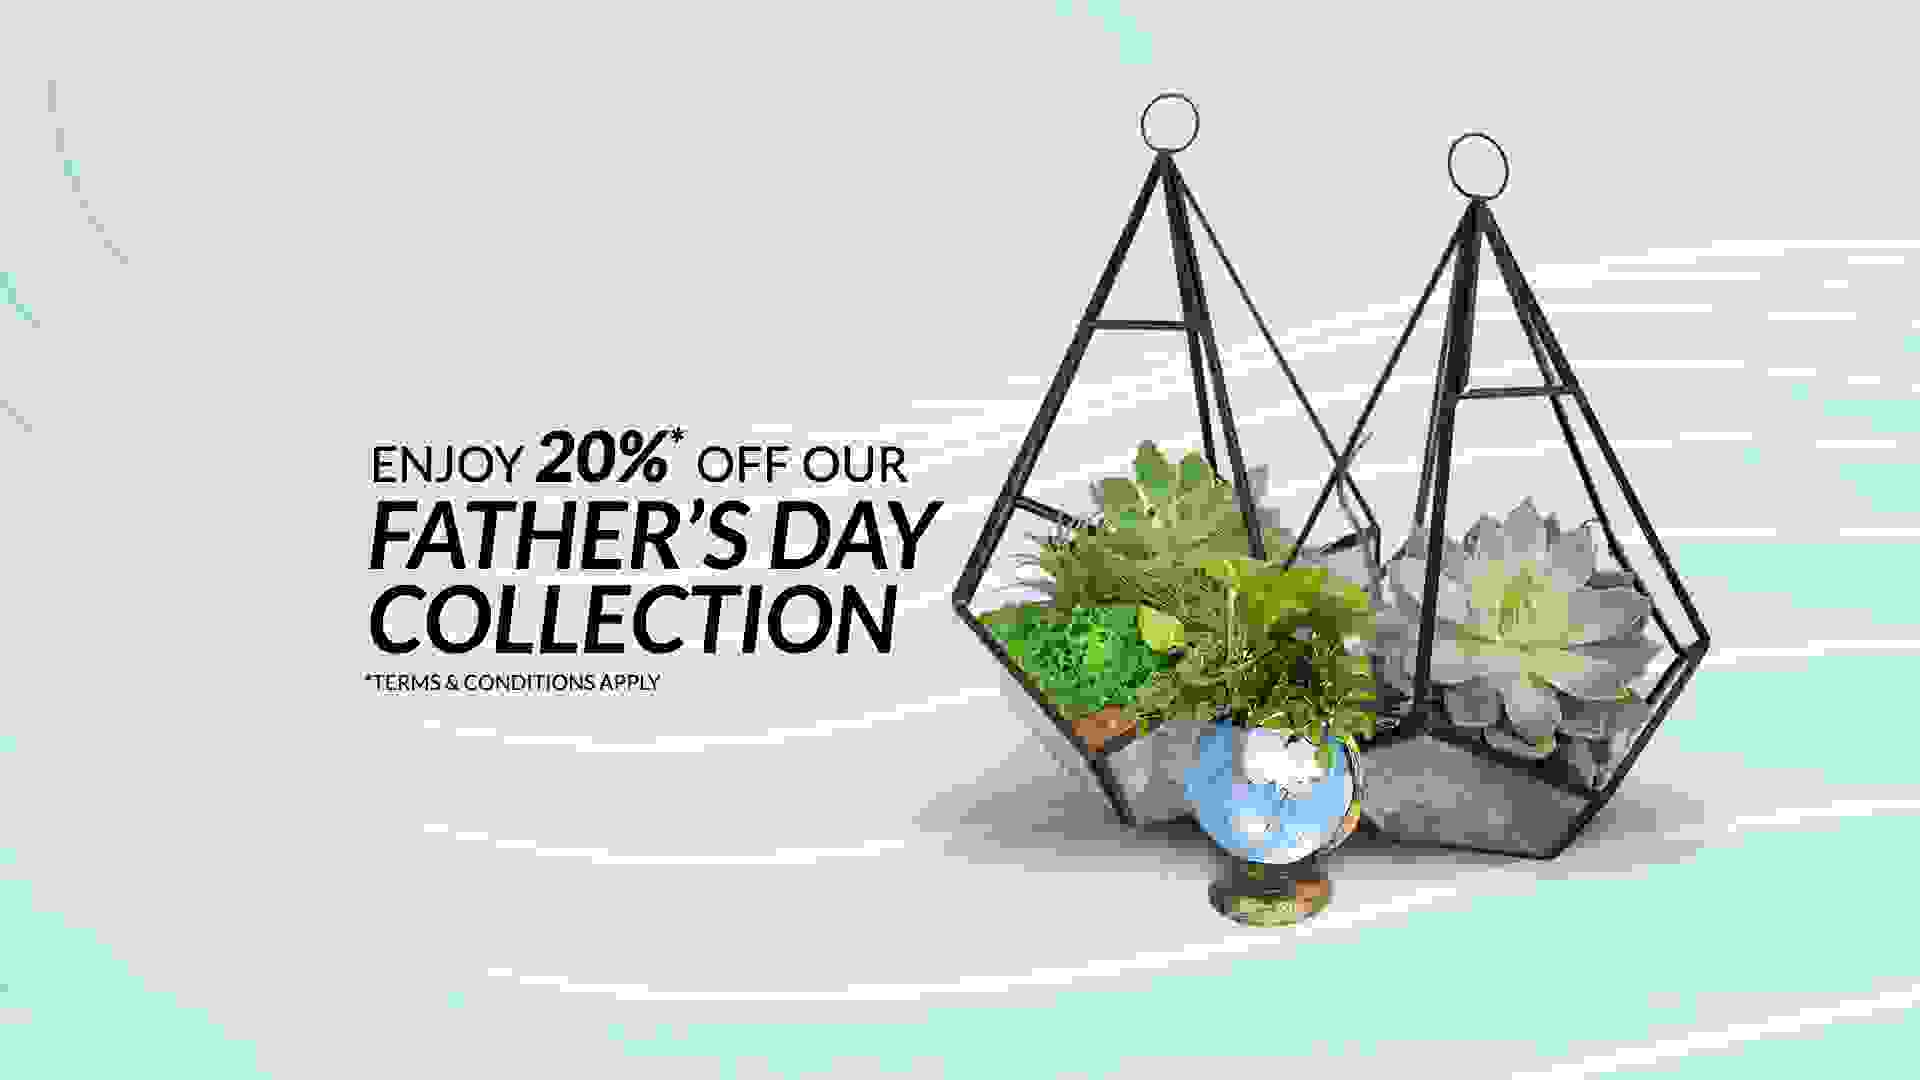 20% off Father's Day collection in Gardens by the Bay eshop!